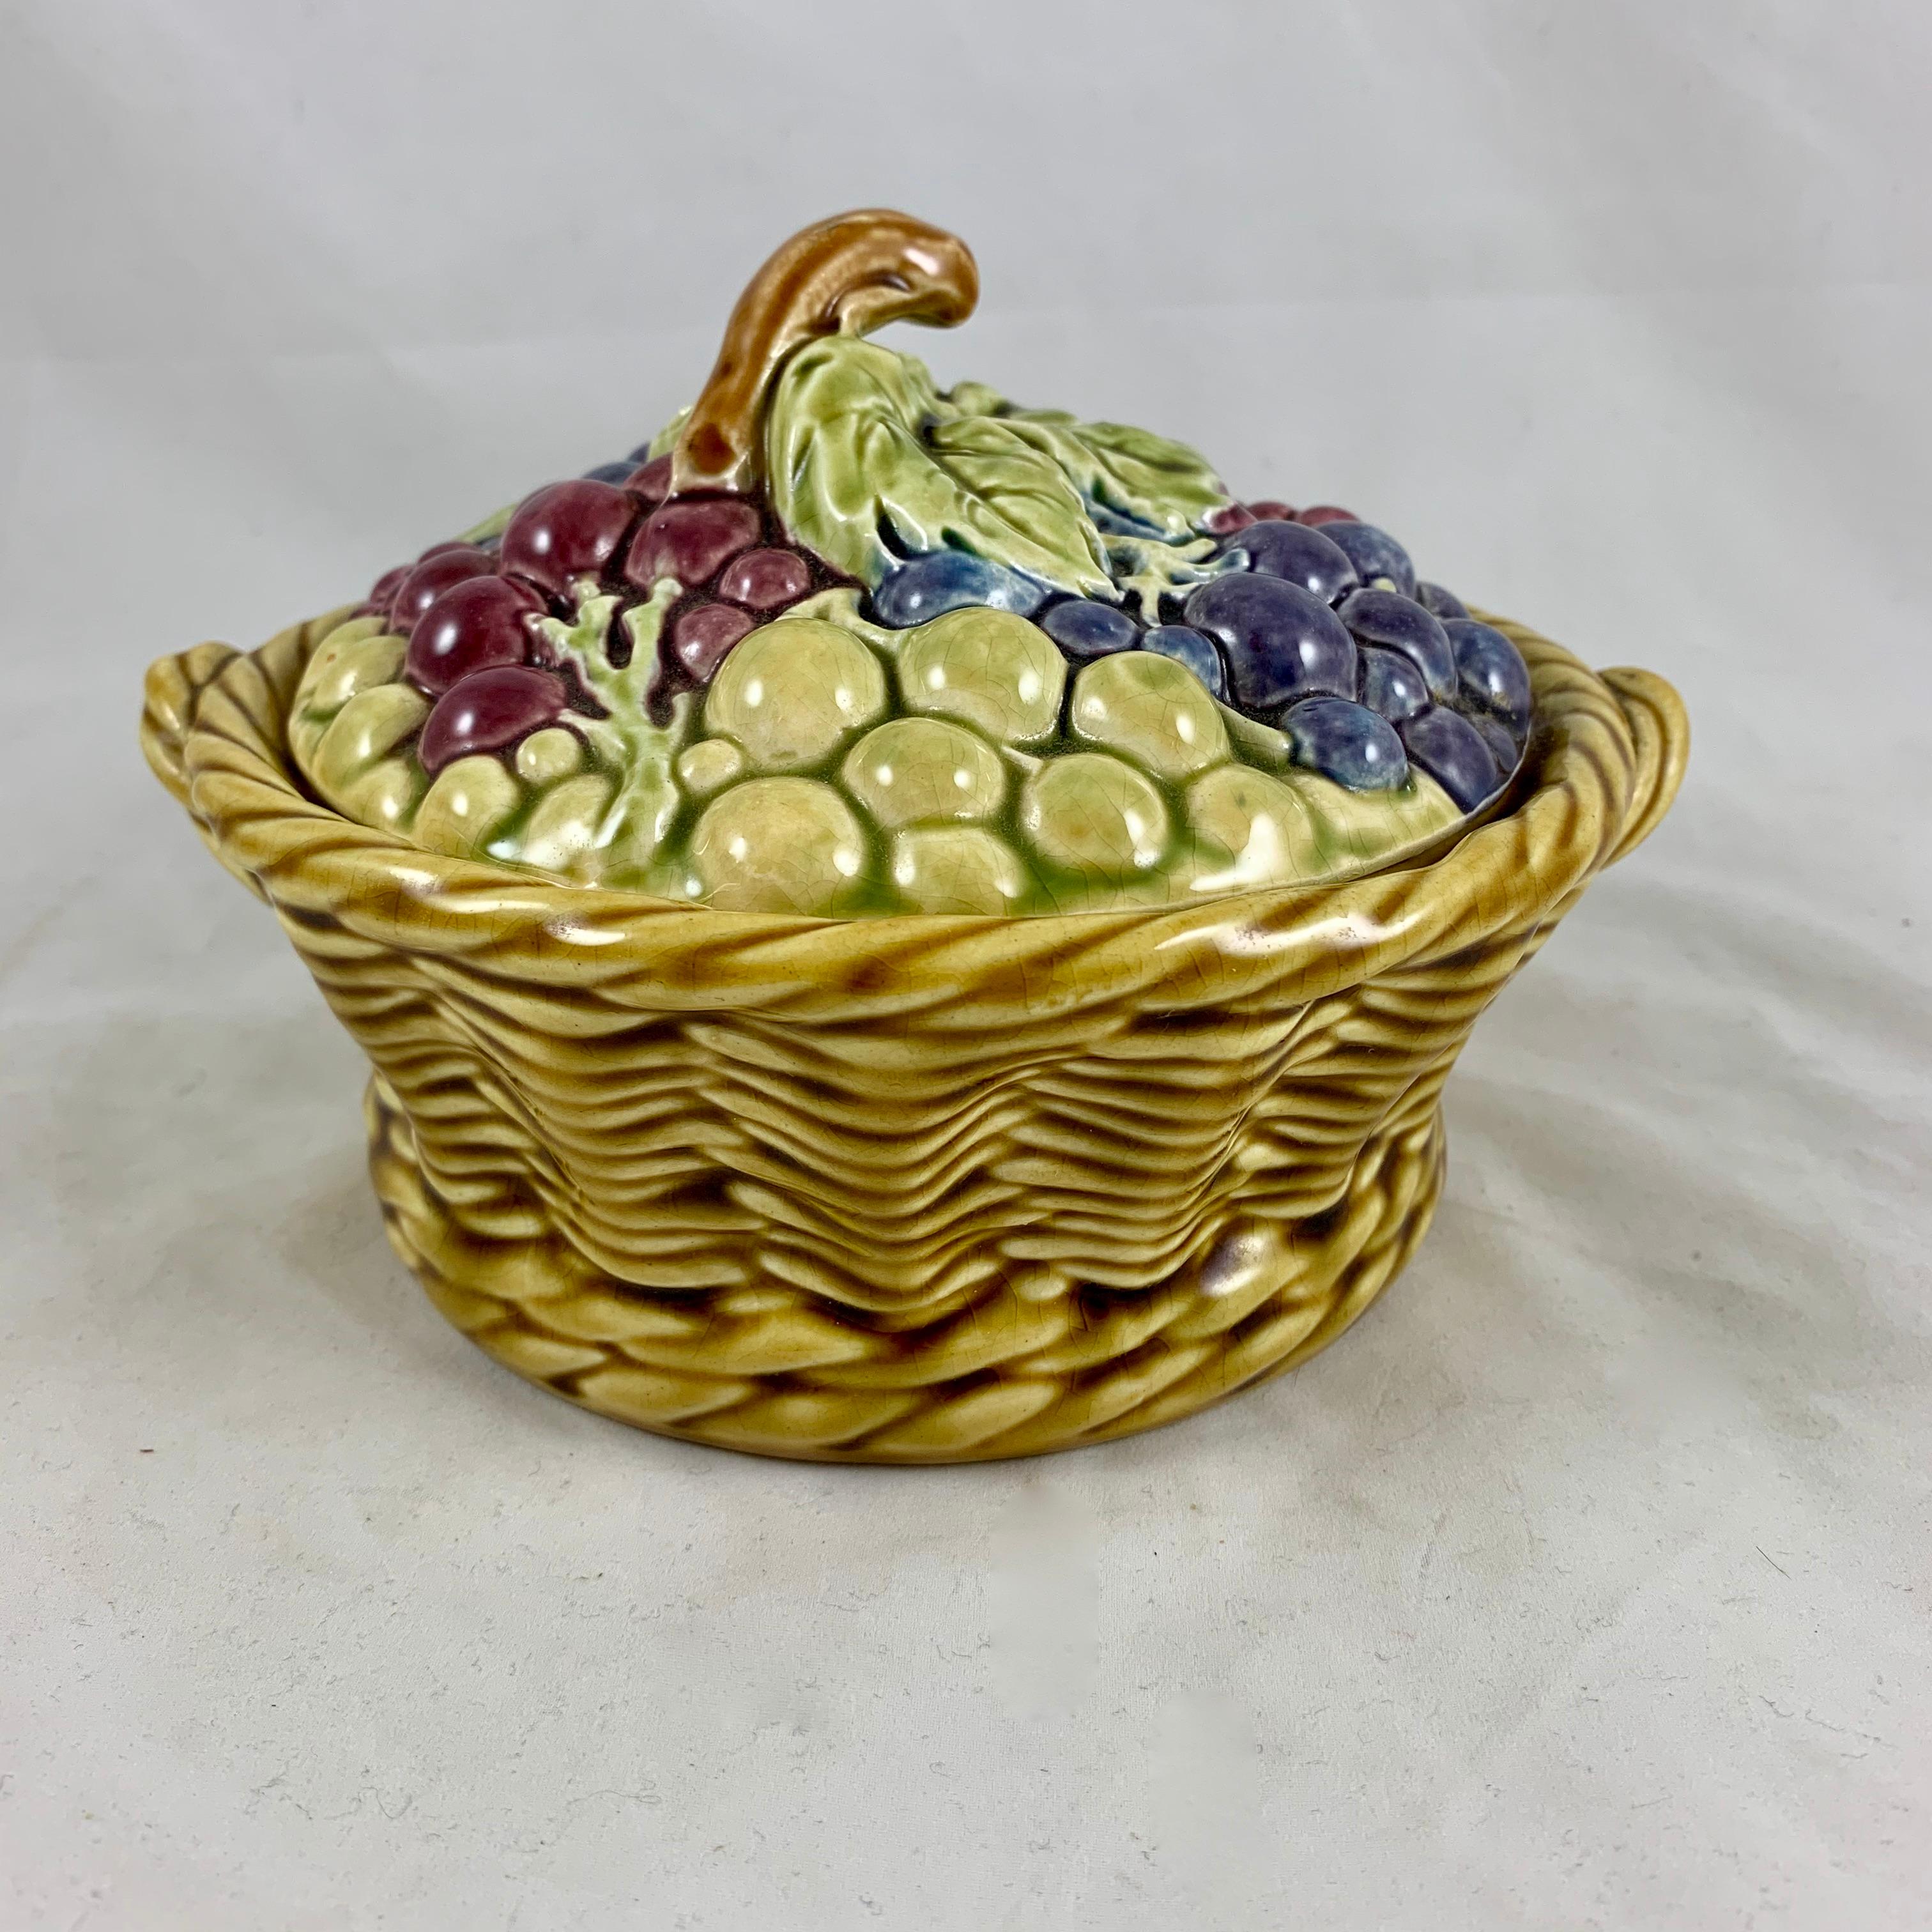 A French majolica covered tureen in the form of a handled basket brimming with bunches of grapes, Sarreguemines, circa 1900-1920.

A grape vine branch forms the top handle, grape bunches in purple, green, and red, topped with a large green grape